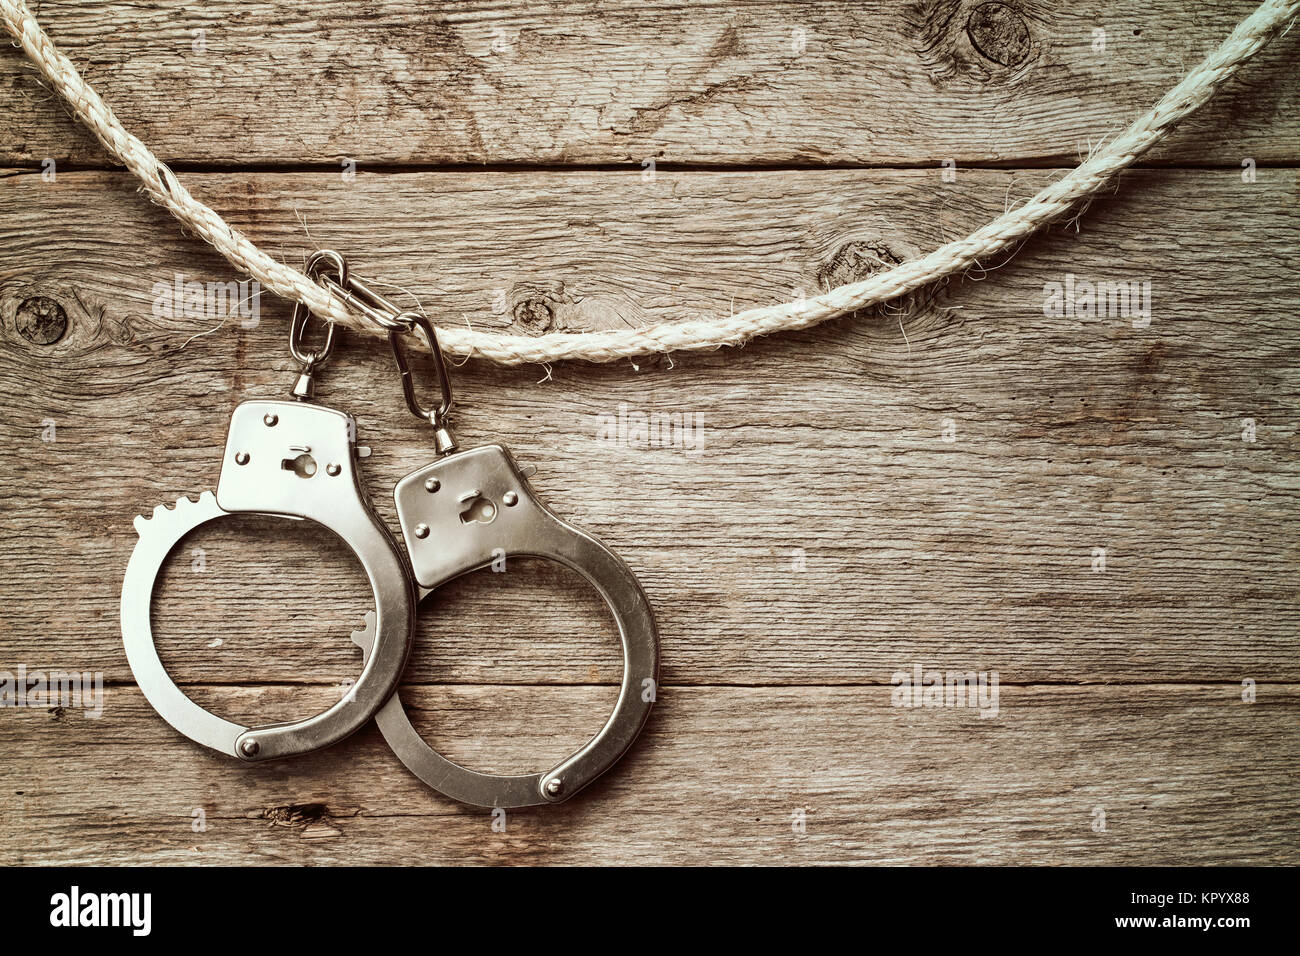 Handcuffs hanging on the rope Stock Photo